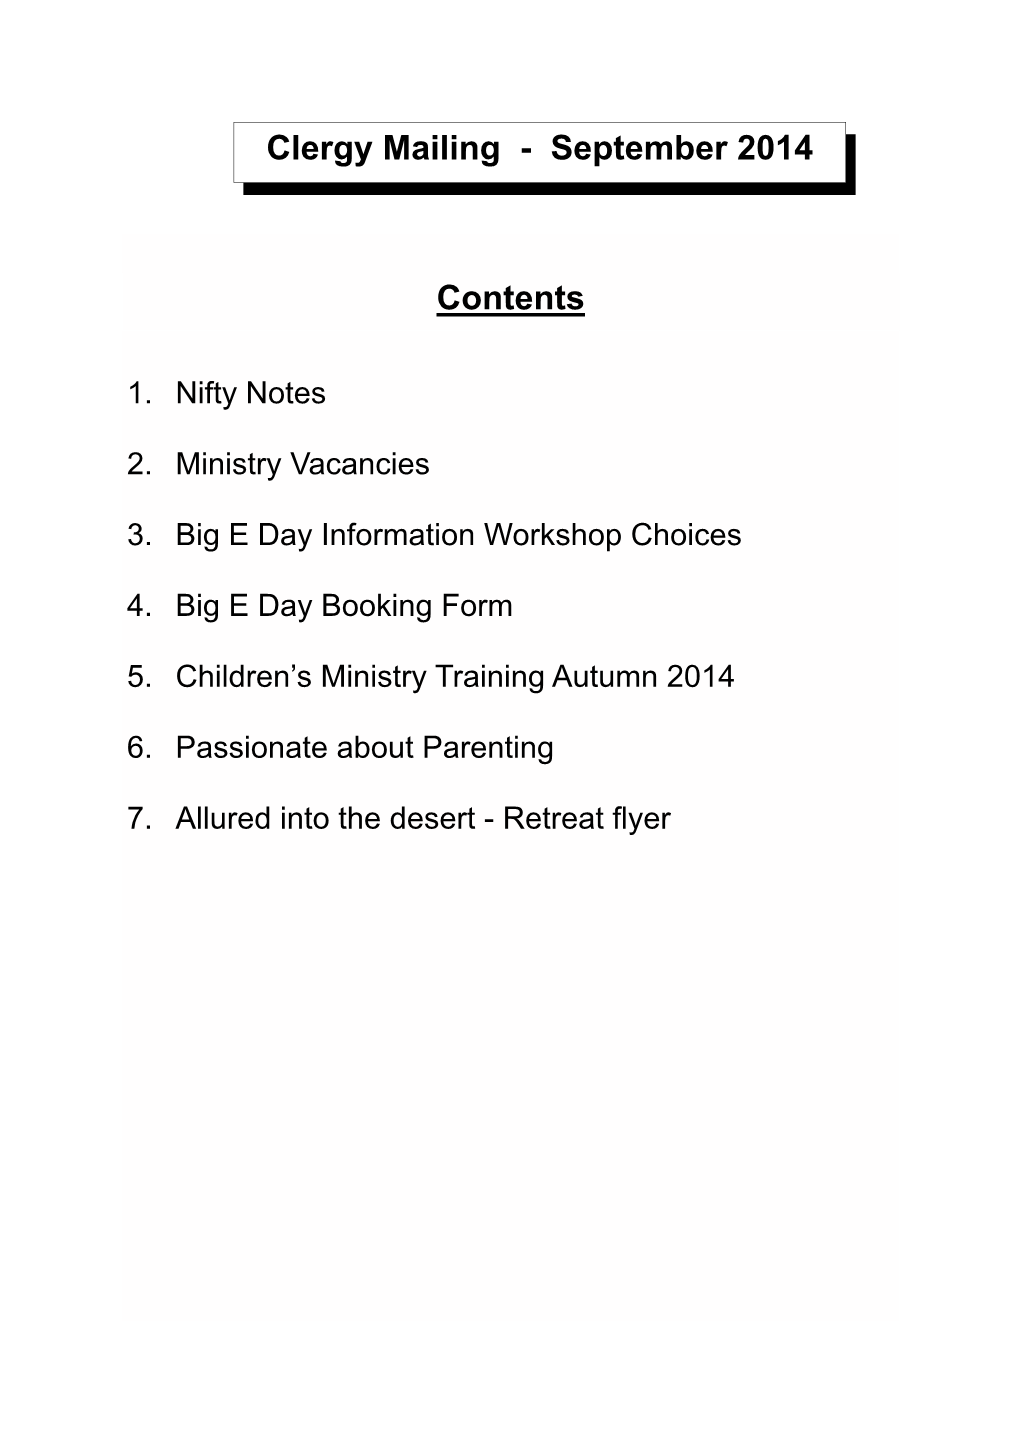 Mailing Contents Page